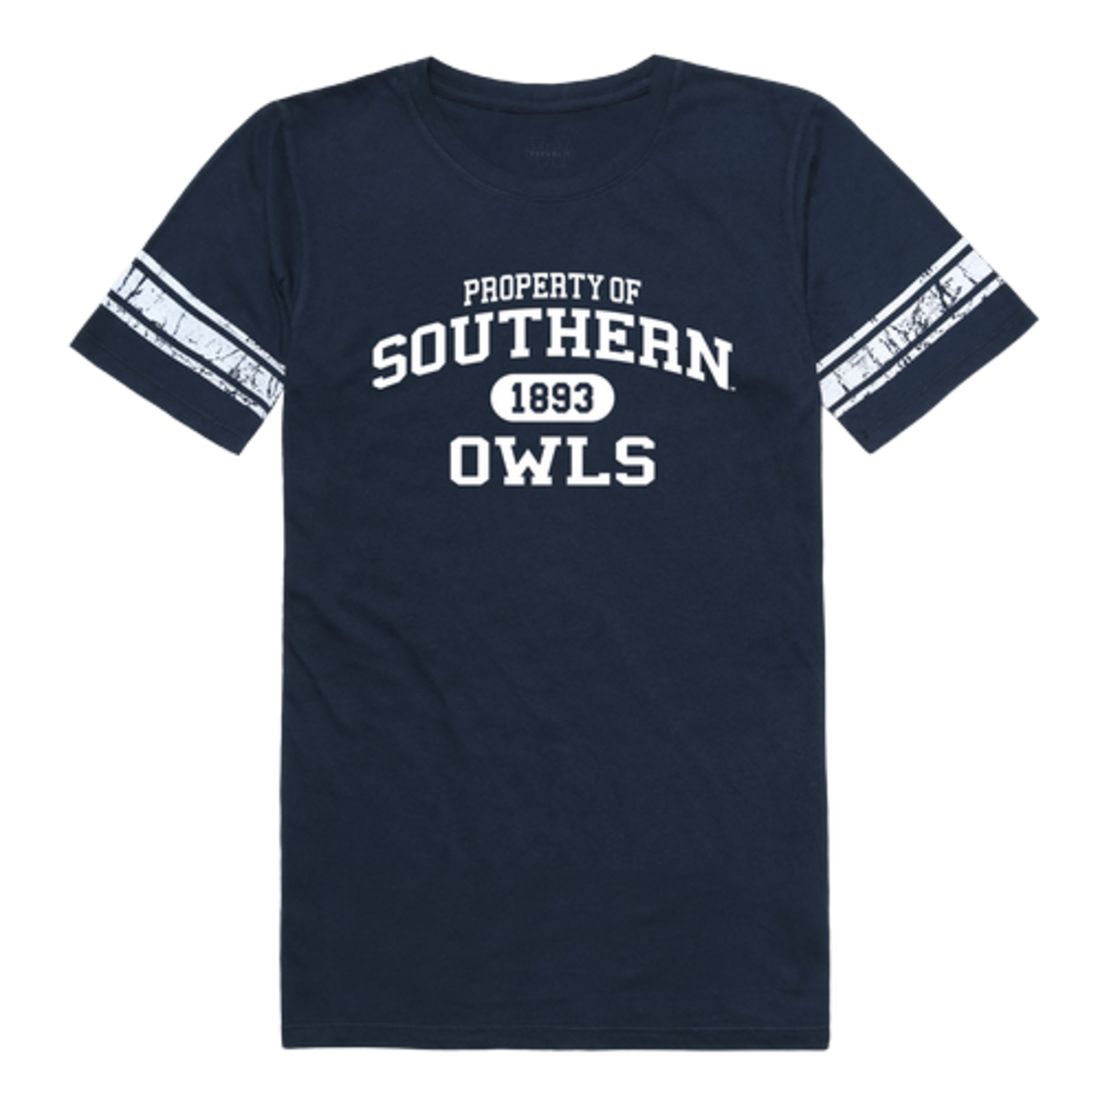 Southern Connecticut State University Owls Womens Property Football T-Shirt Tee